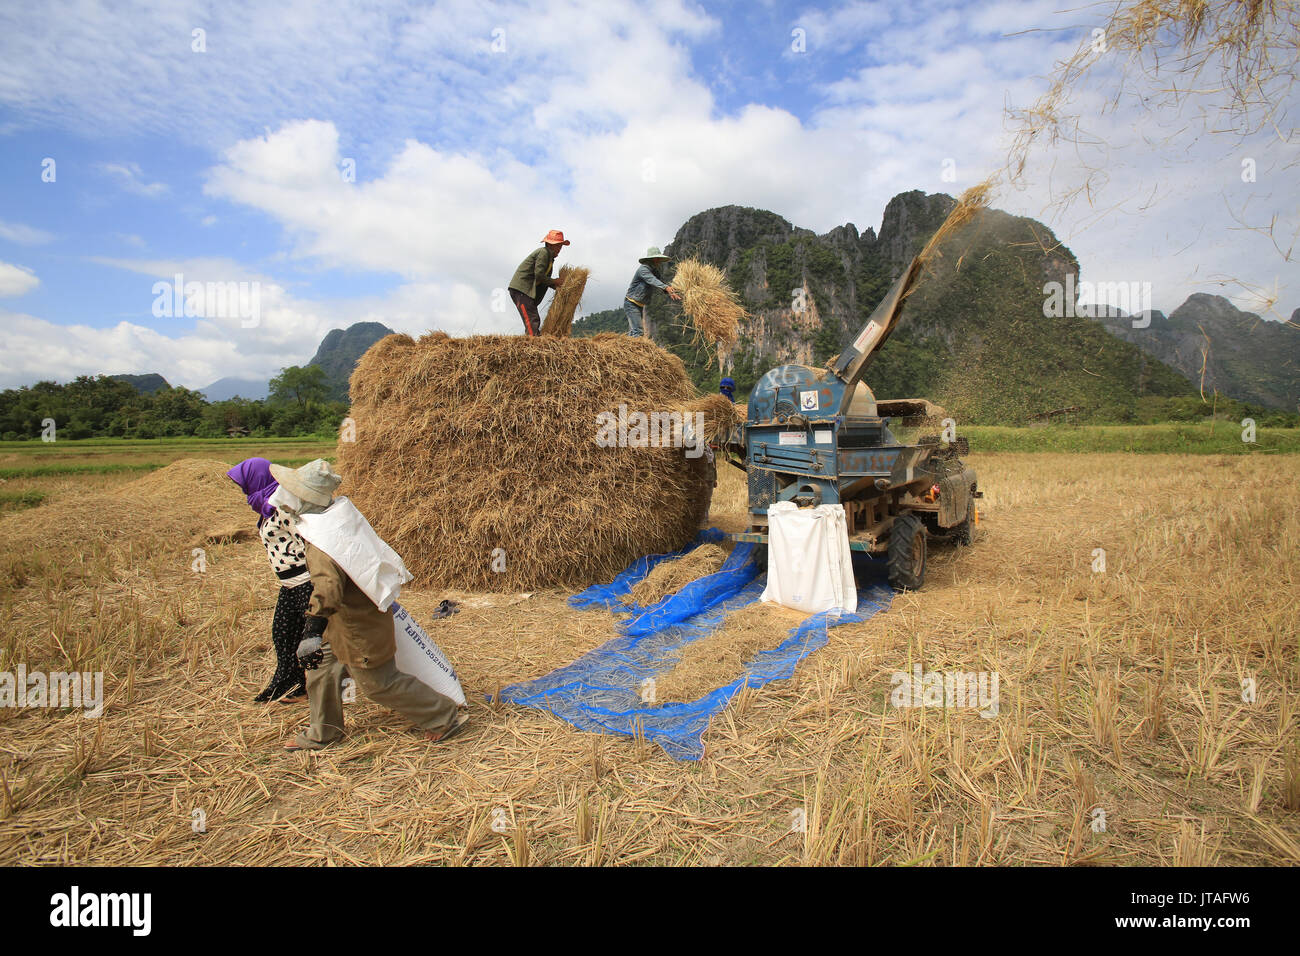 Rice field, Lao farmers harvesting rice in rural landscape, Laos, Indochina, Southeast Asia, Asia Stock Photo